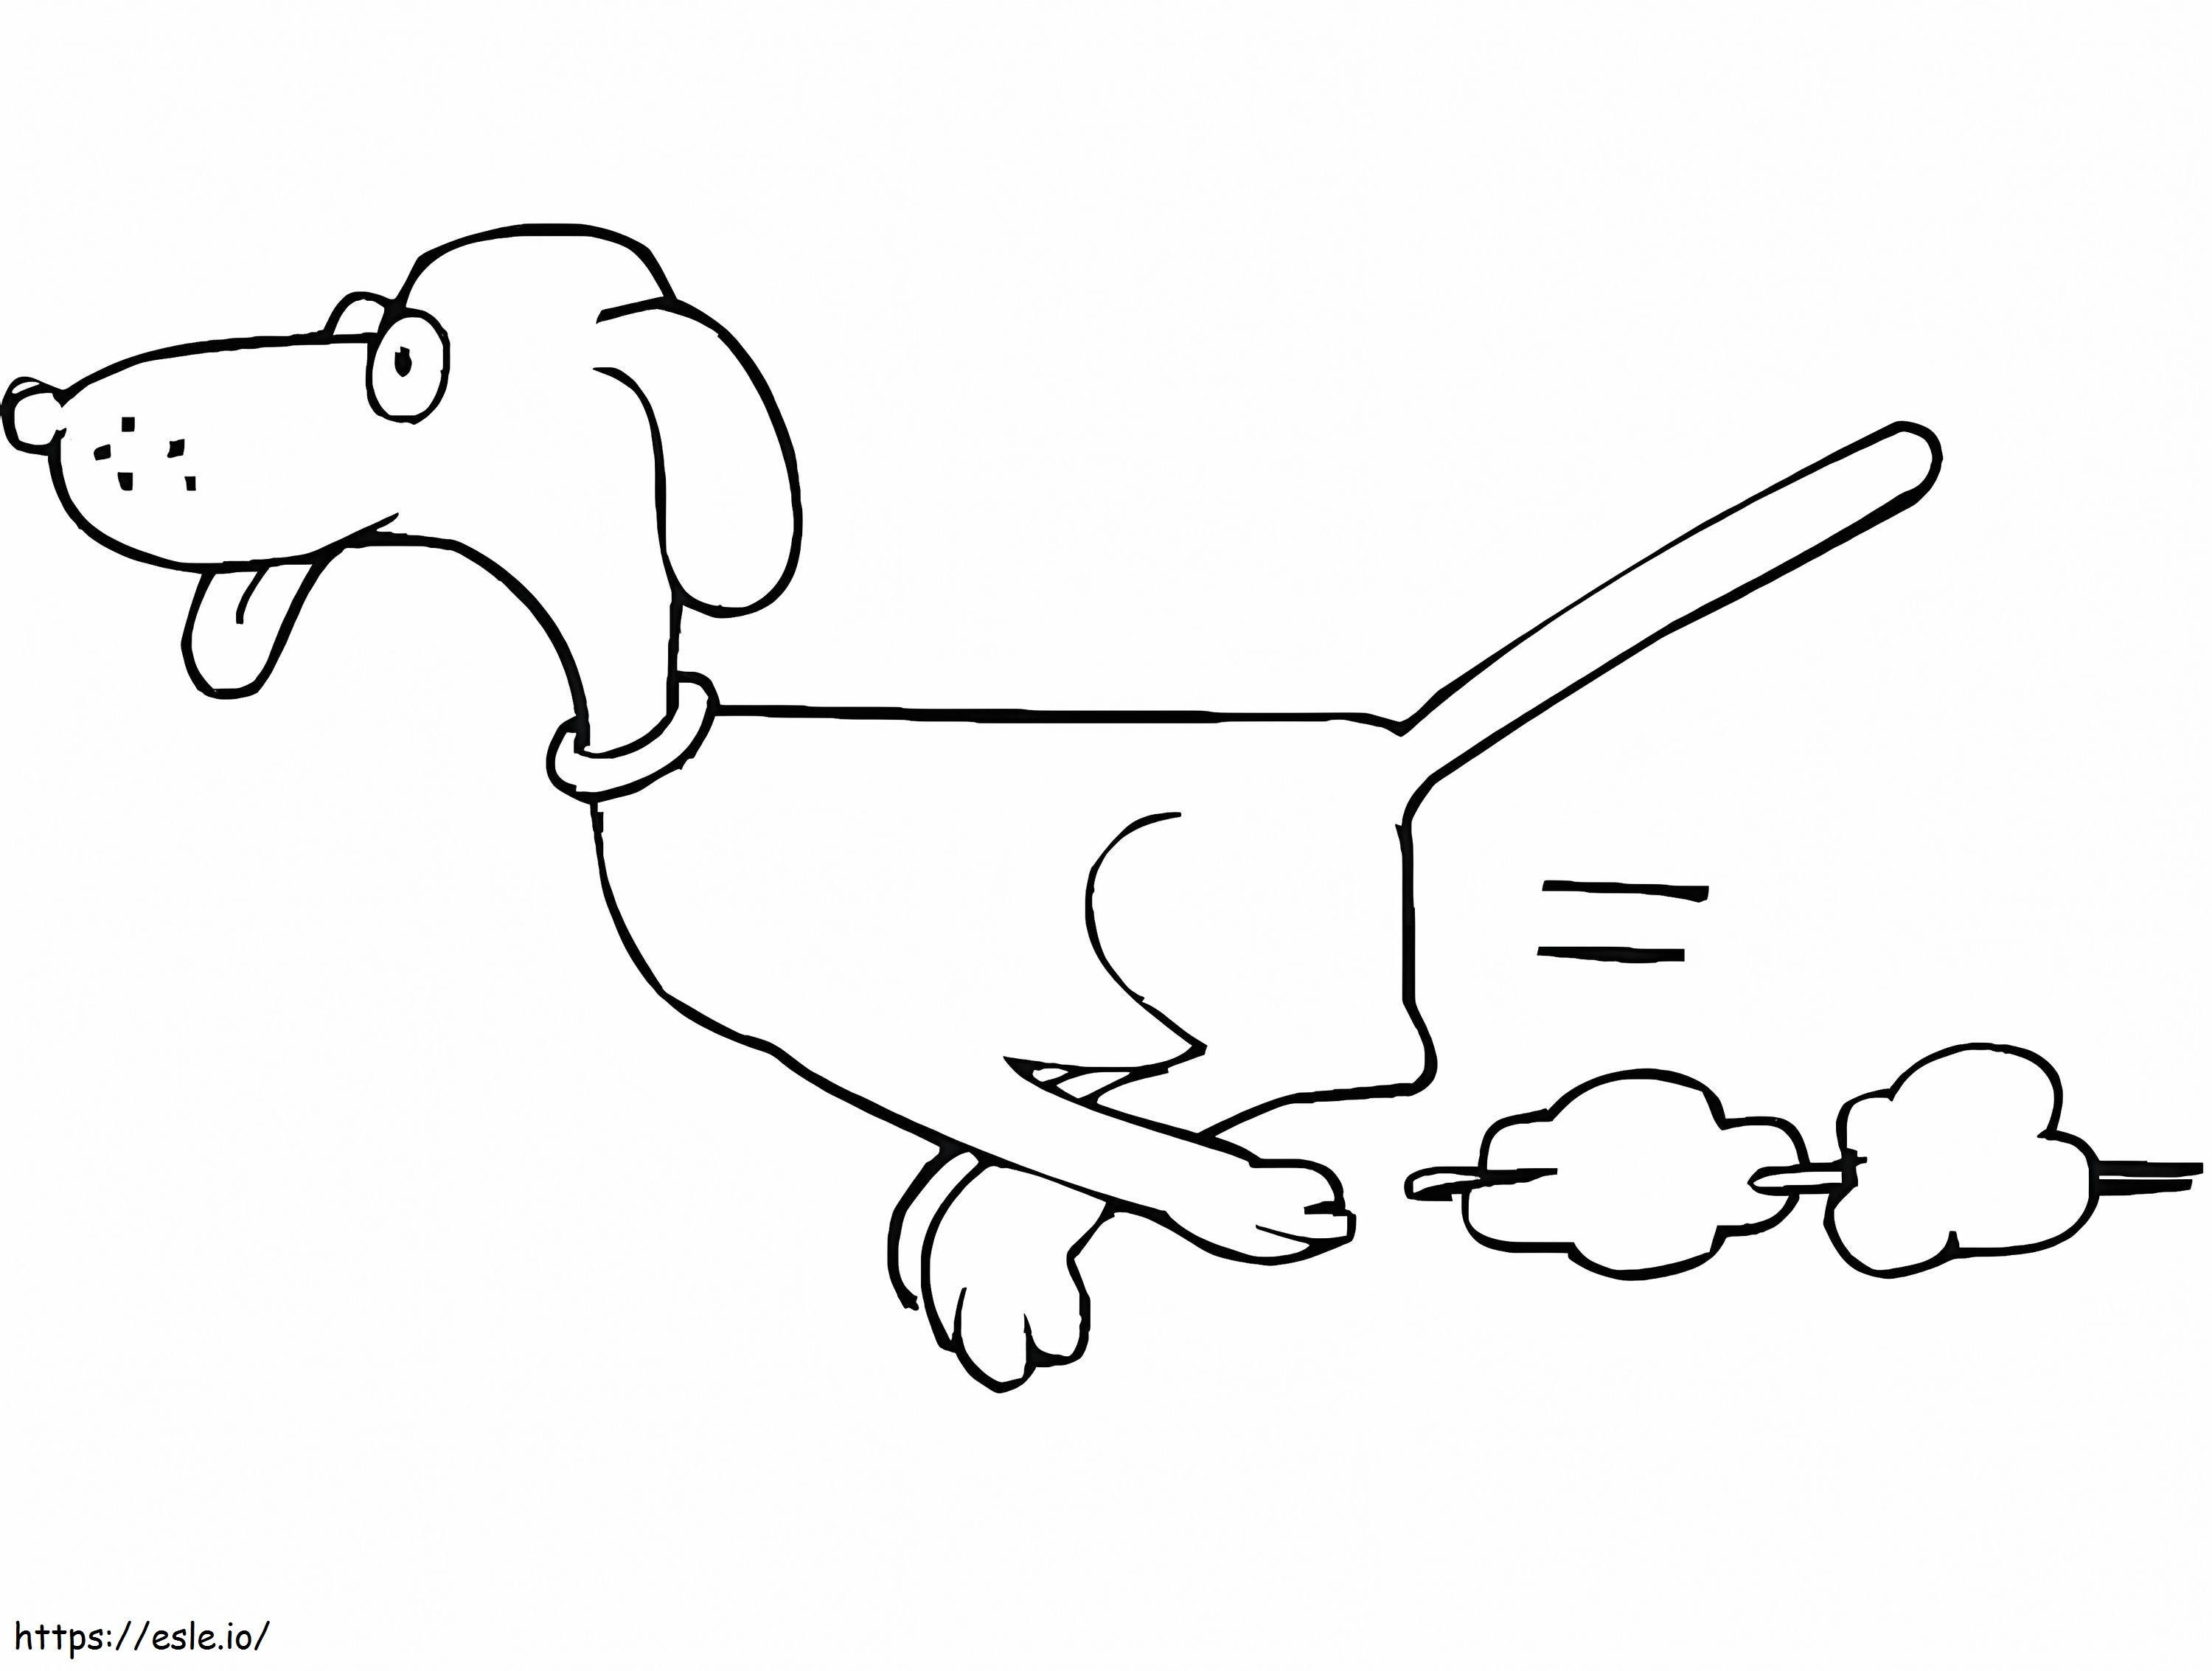 Dog Running Very Fast coloring page